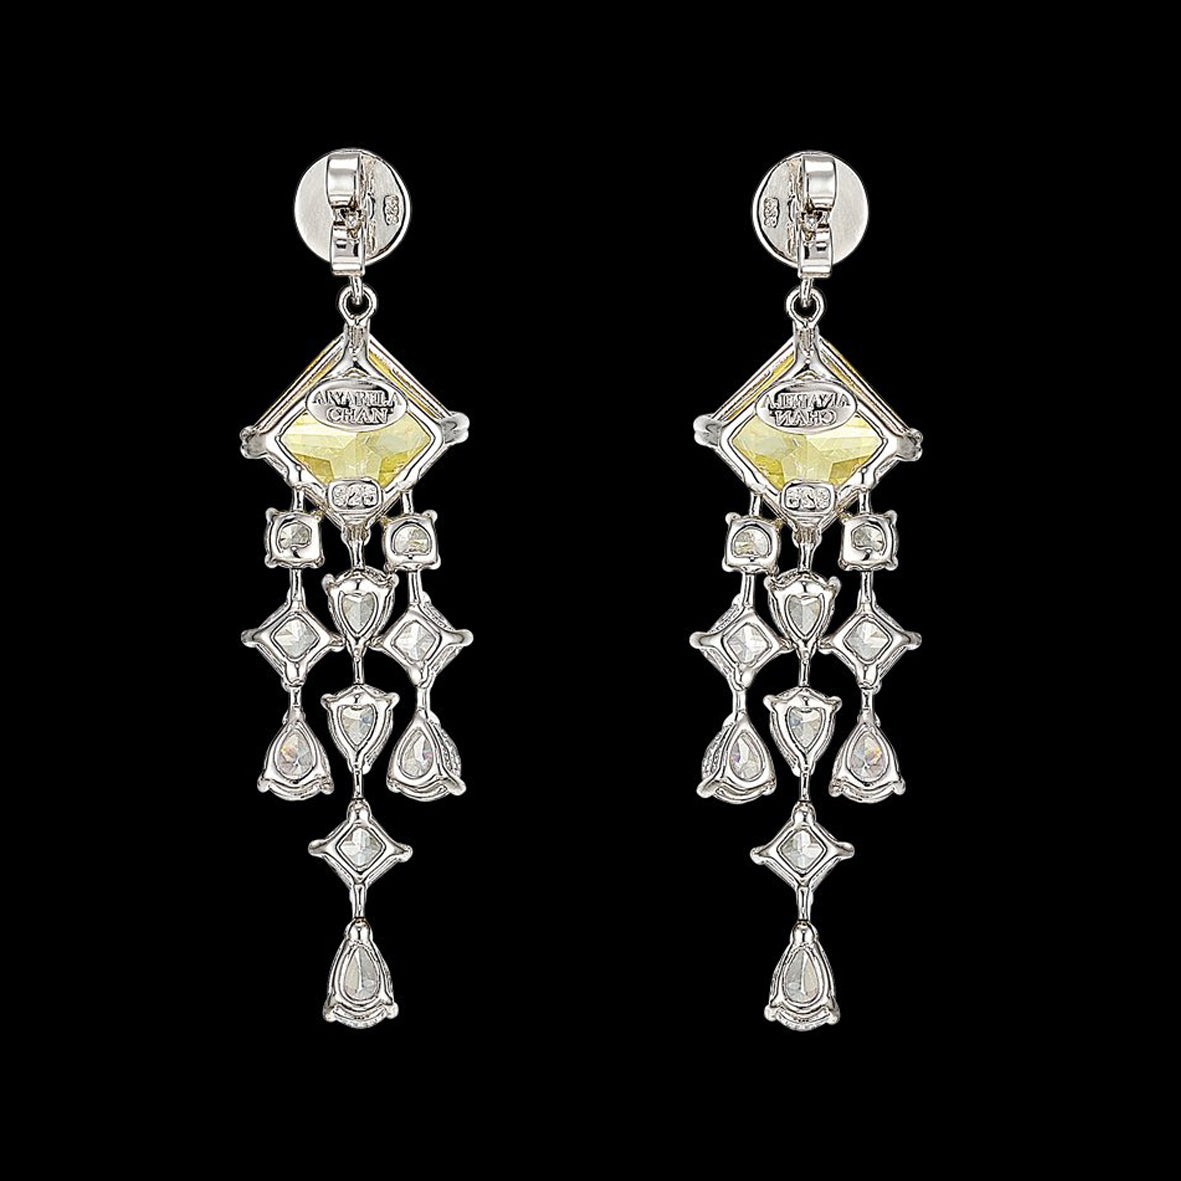 Asscher Canary Earrings, Earring, Anabela Chan Joaillerie - Fine jewelry with laboratory grown and created gemstones hand-crafted in the United Kingdom. Anabela Chan Joaillerie is the first fine jewellery brand in the world to champion laboratory-grown and created gemstones with high jewellery design, artisanal craftsmanship and a focus on ethical and sustainable innovations.